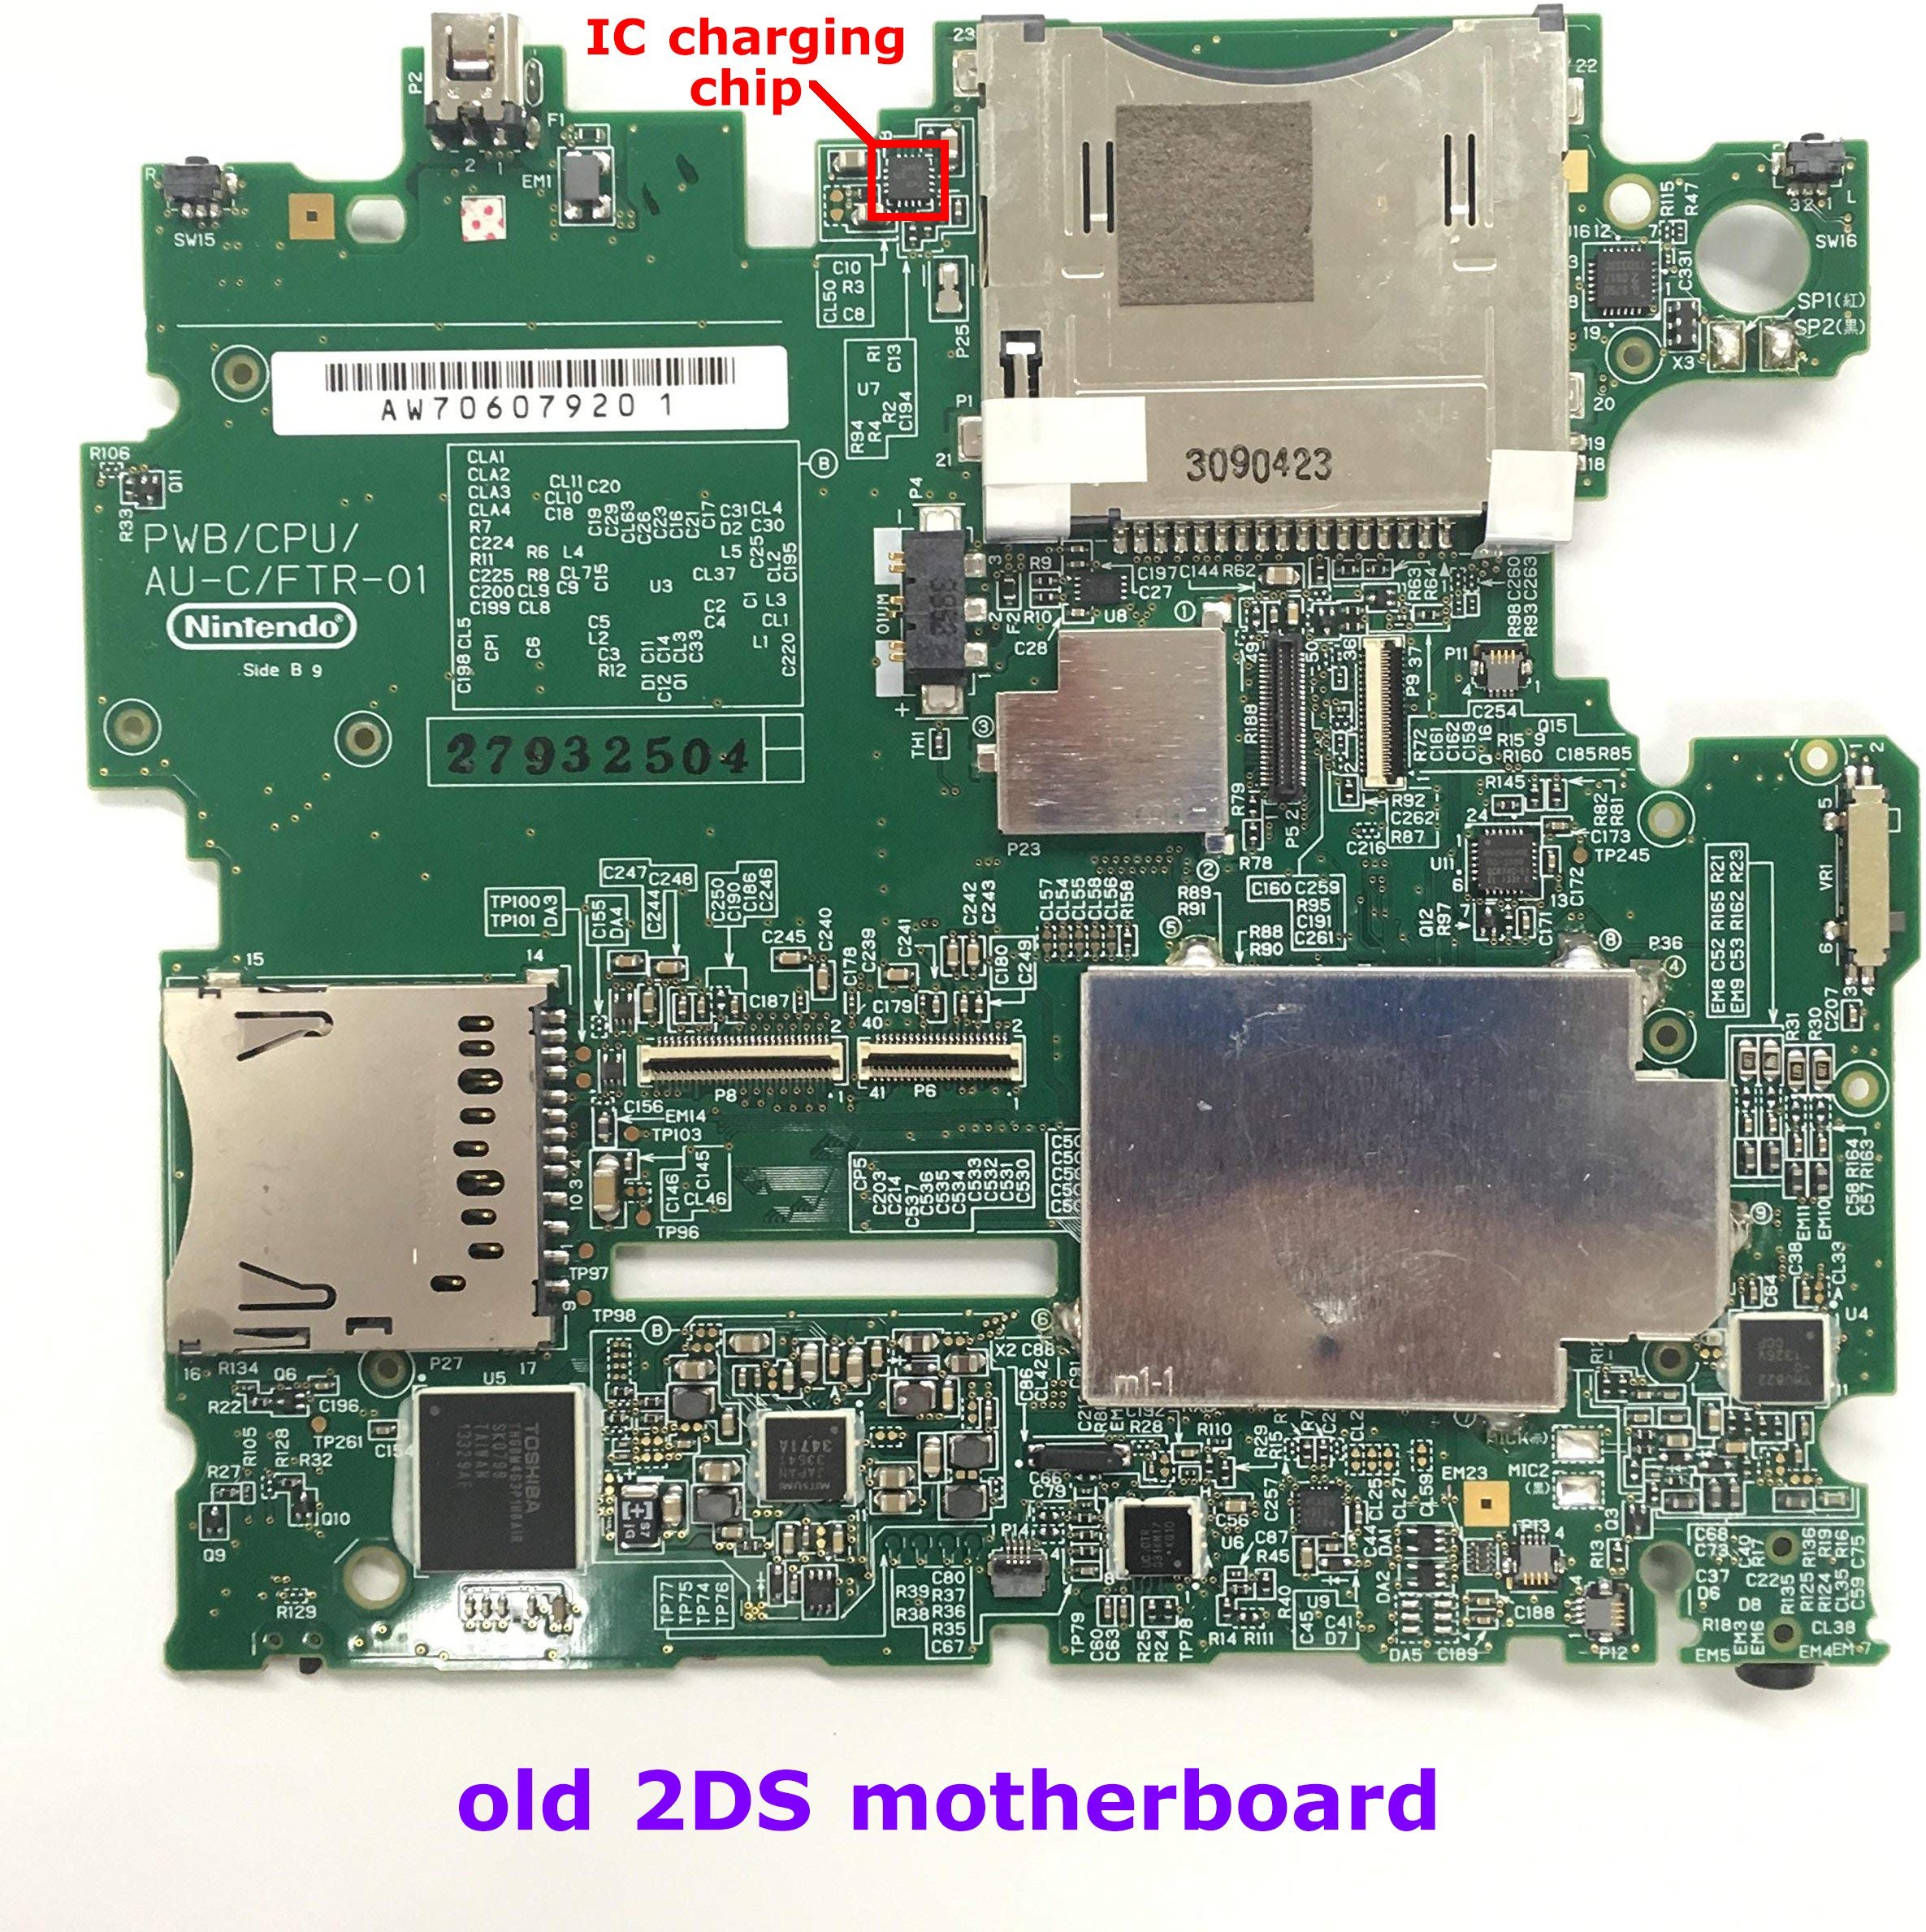 o2DS IC charging chip.jpg